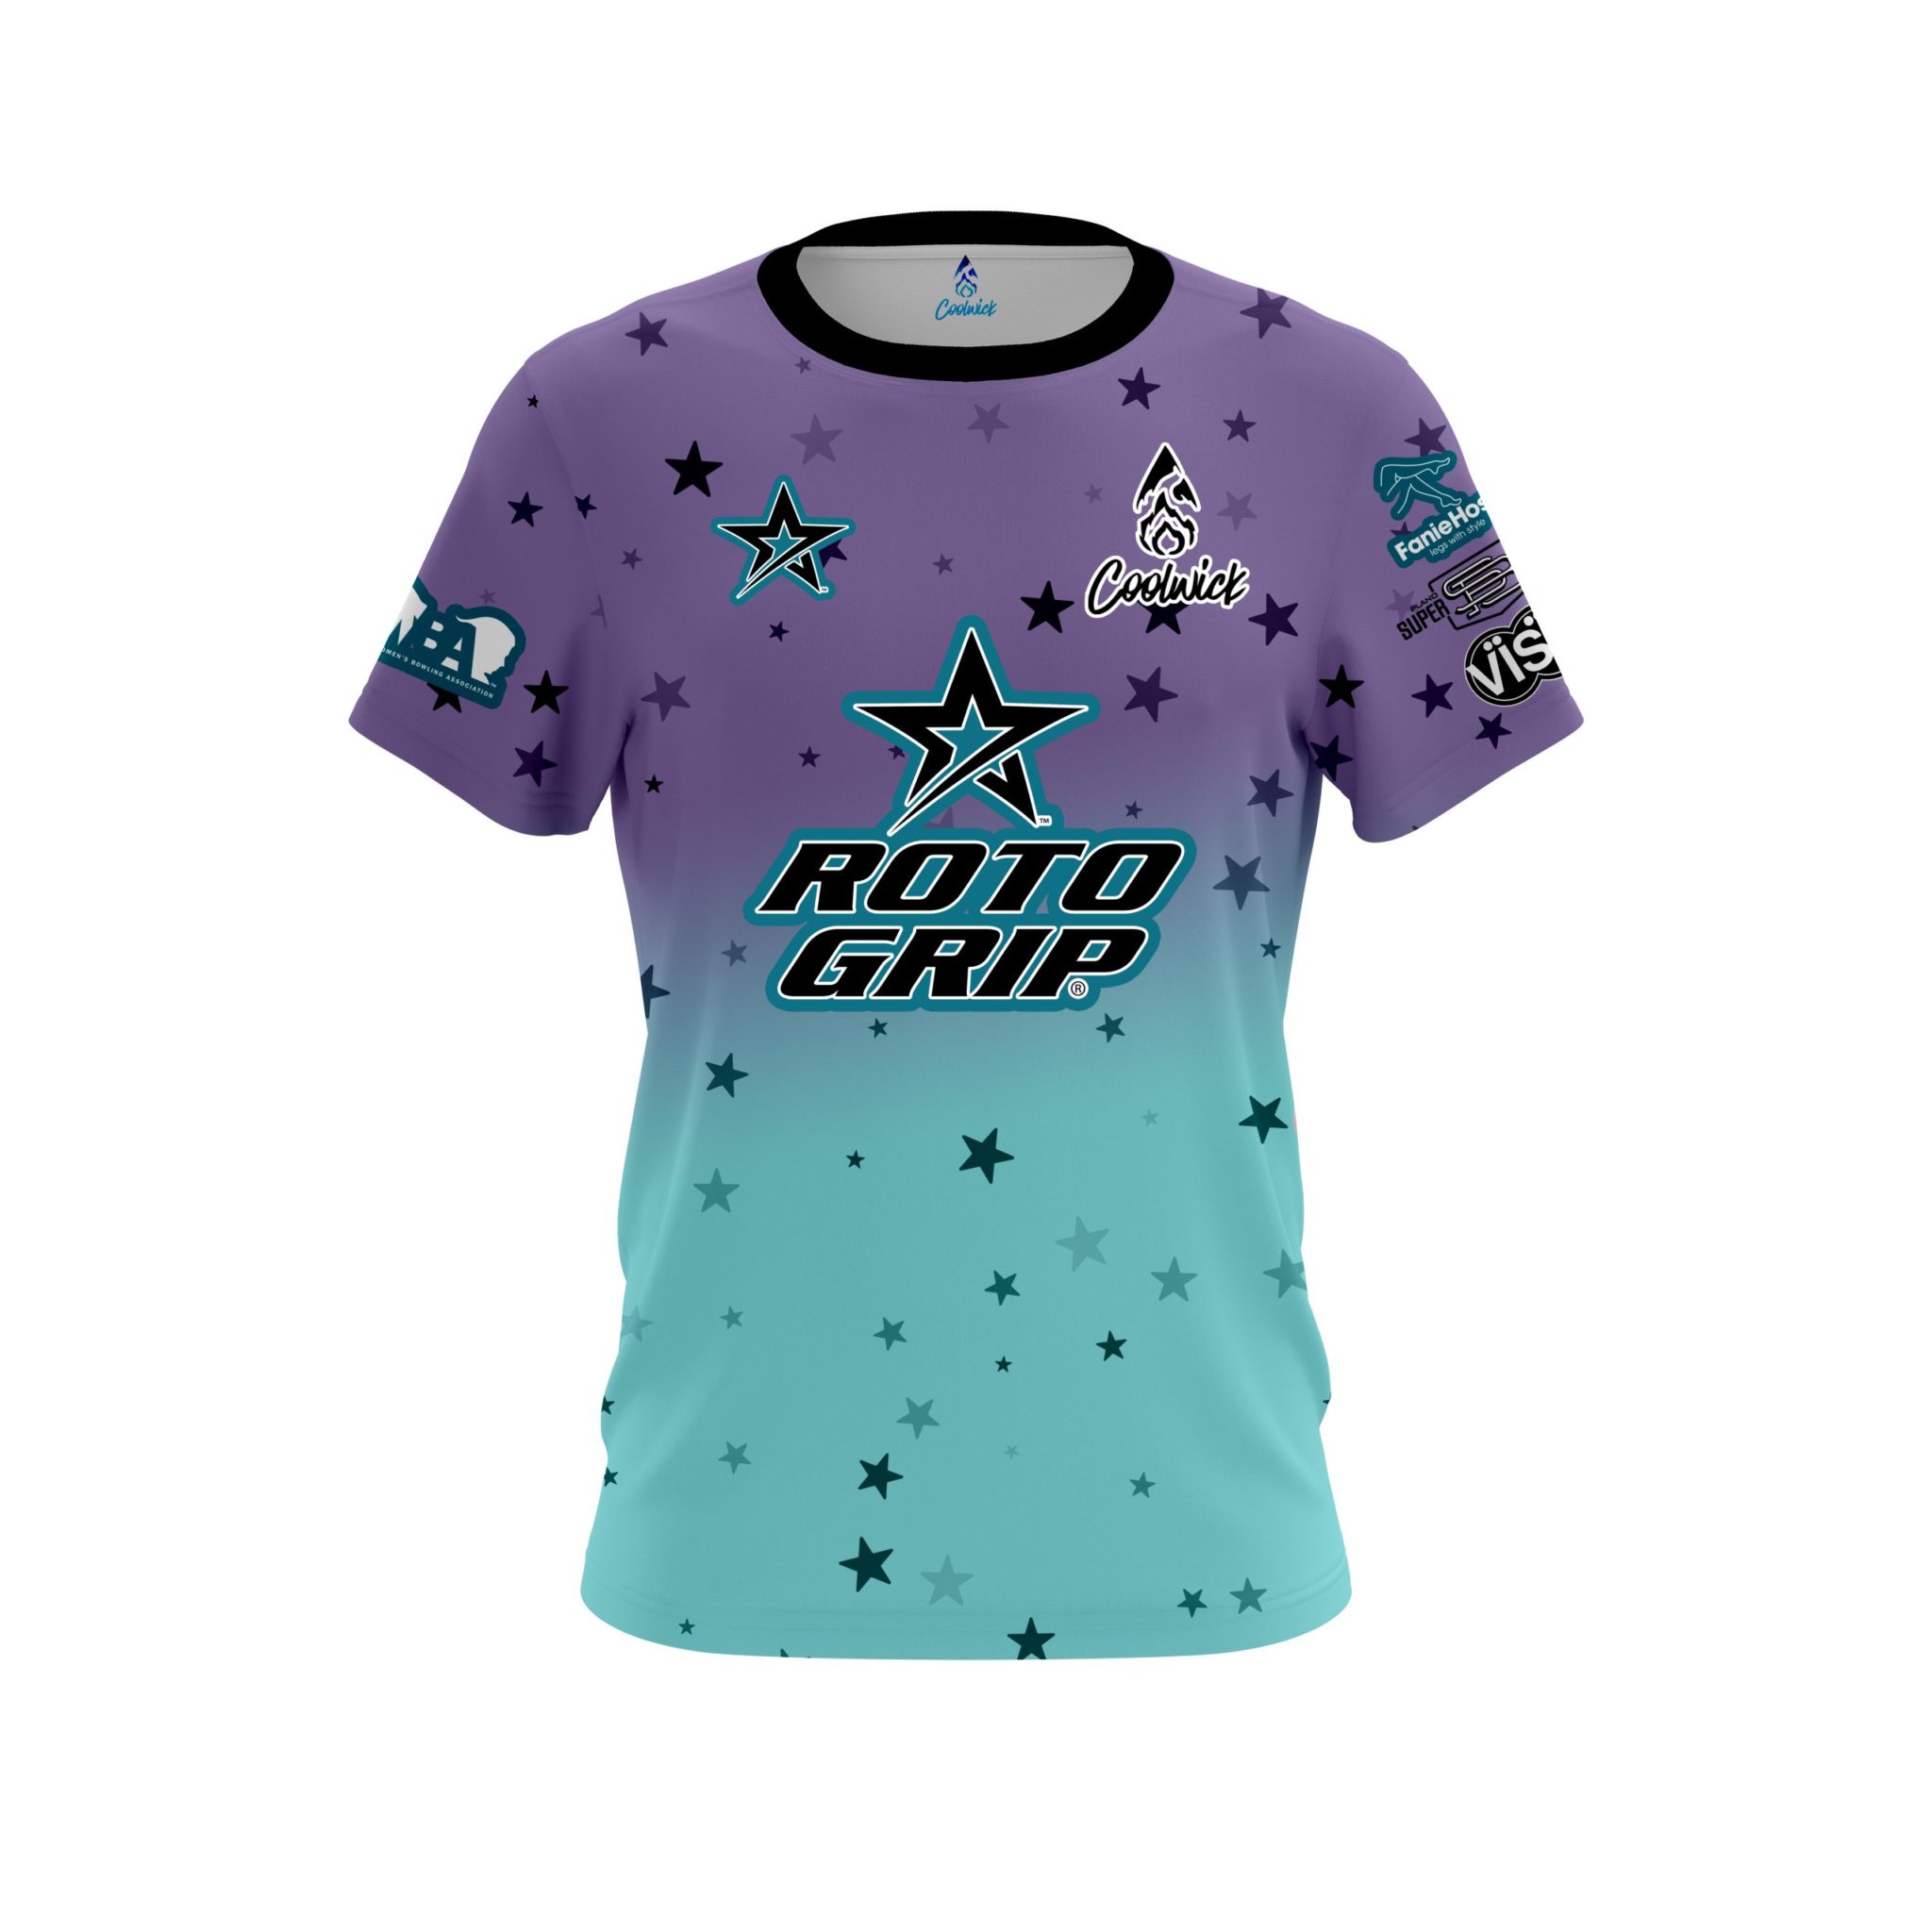 teal and purple jersey